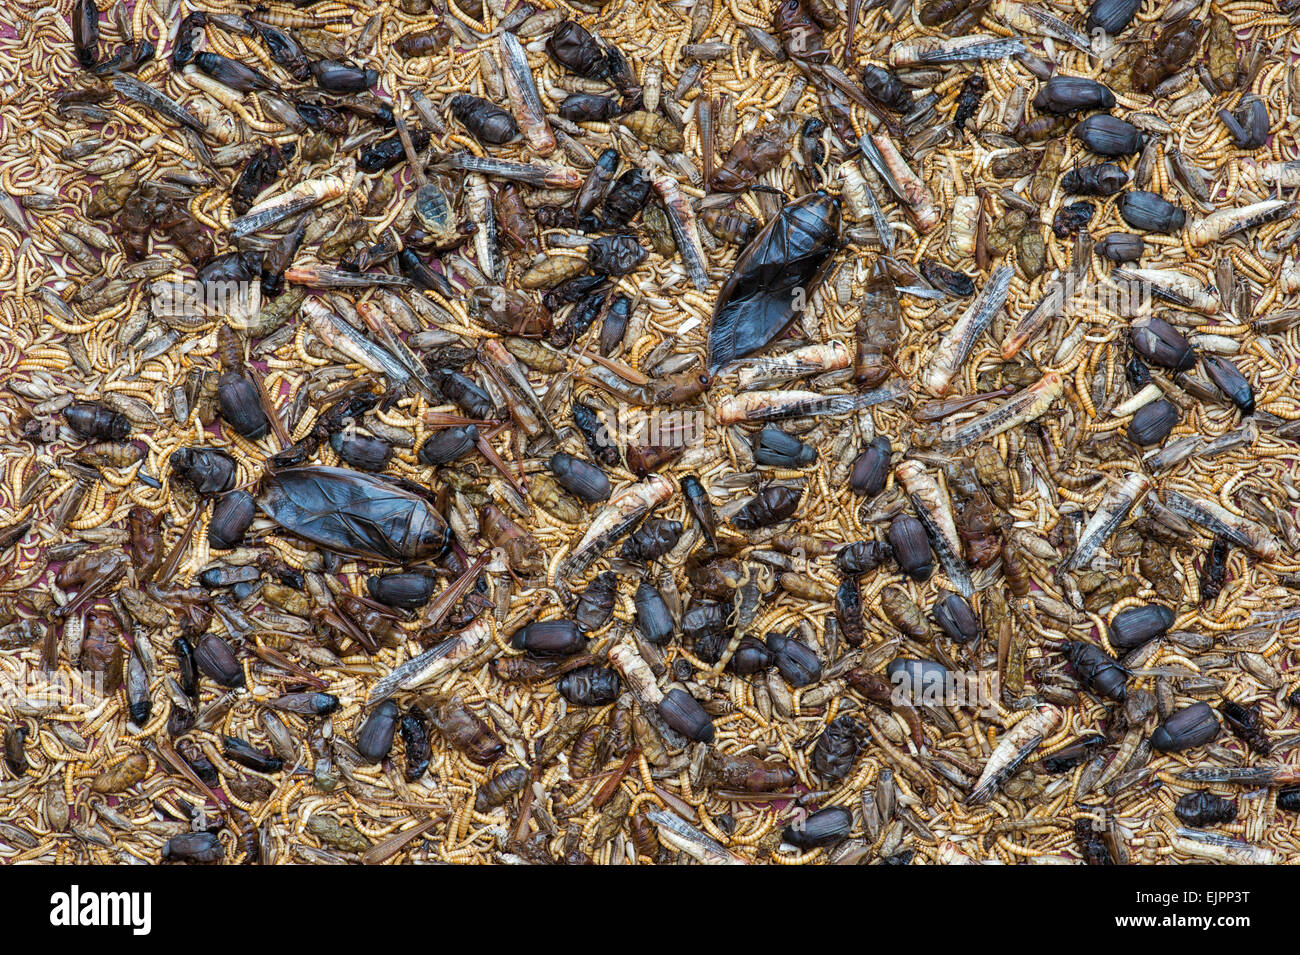 Edible insects. Grasshoppers, Buffalo Worms, Crickets, Mealworms, Beetles, scorpions, waterbugs and Locusts. Food of the future Stock Photo